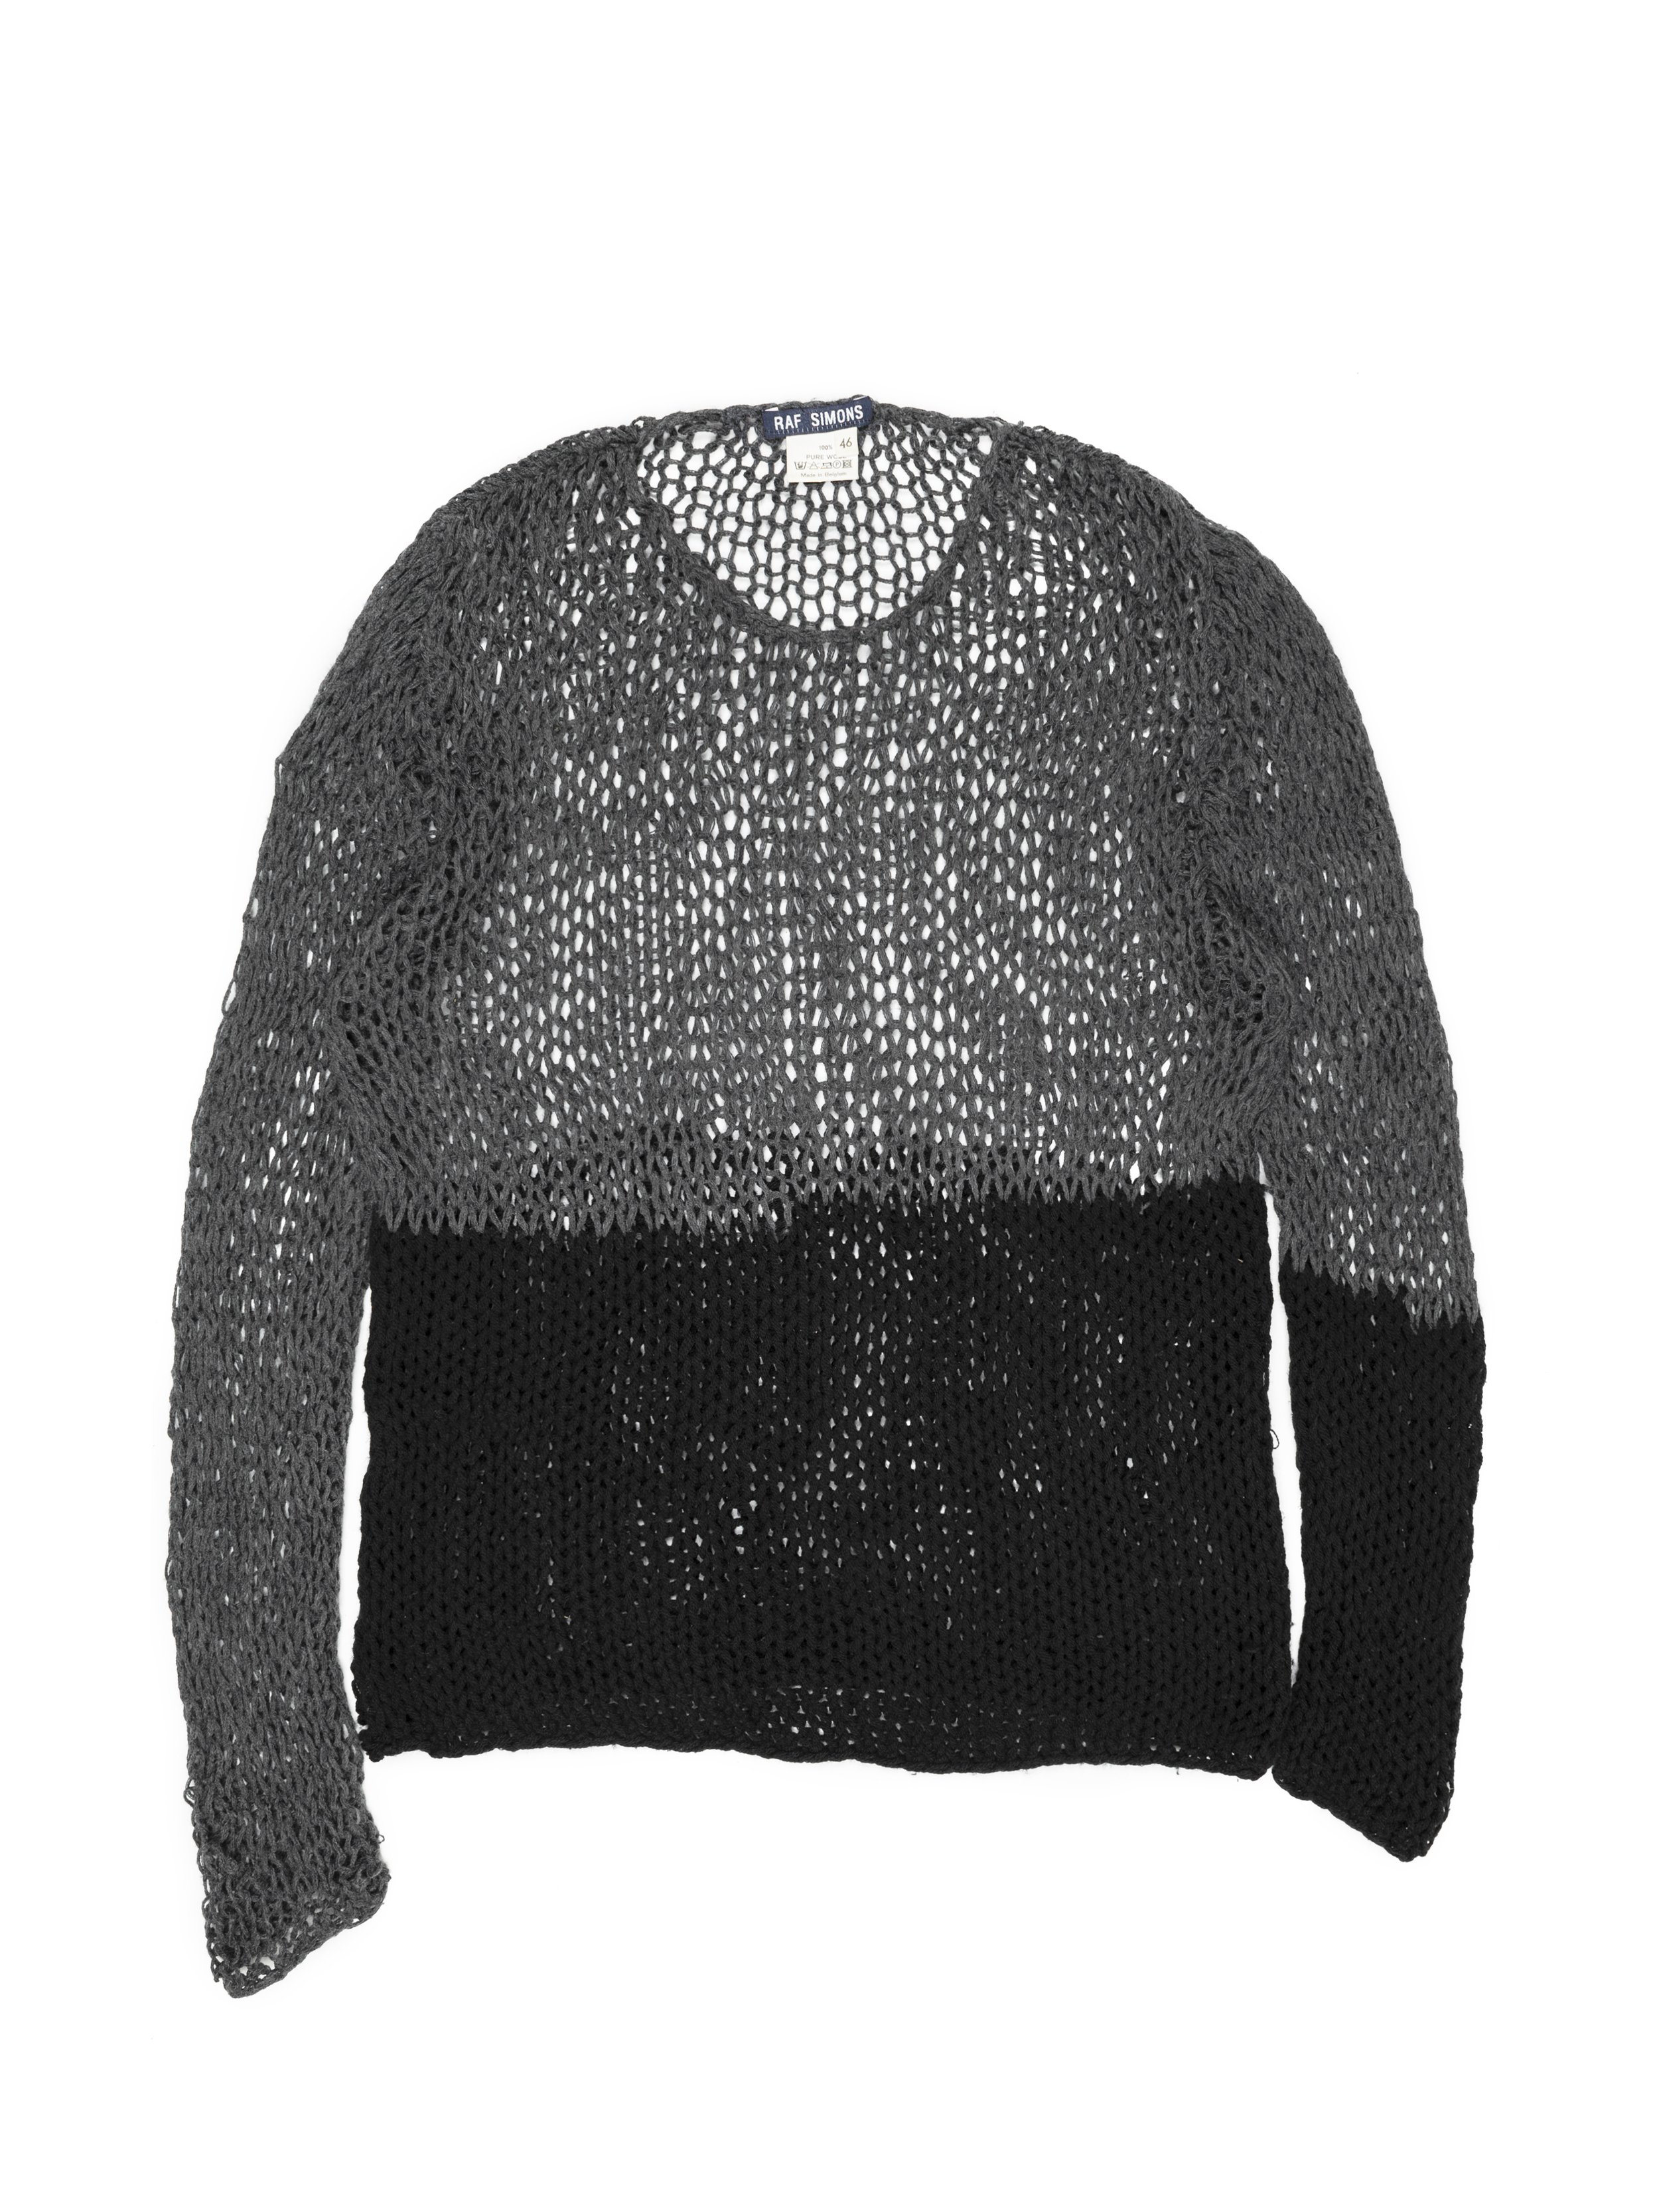 Raf Simons AW1997 Open-Knit Sweater — Middleman Store